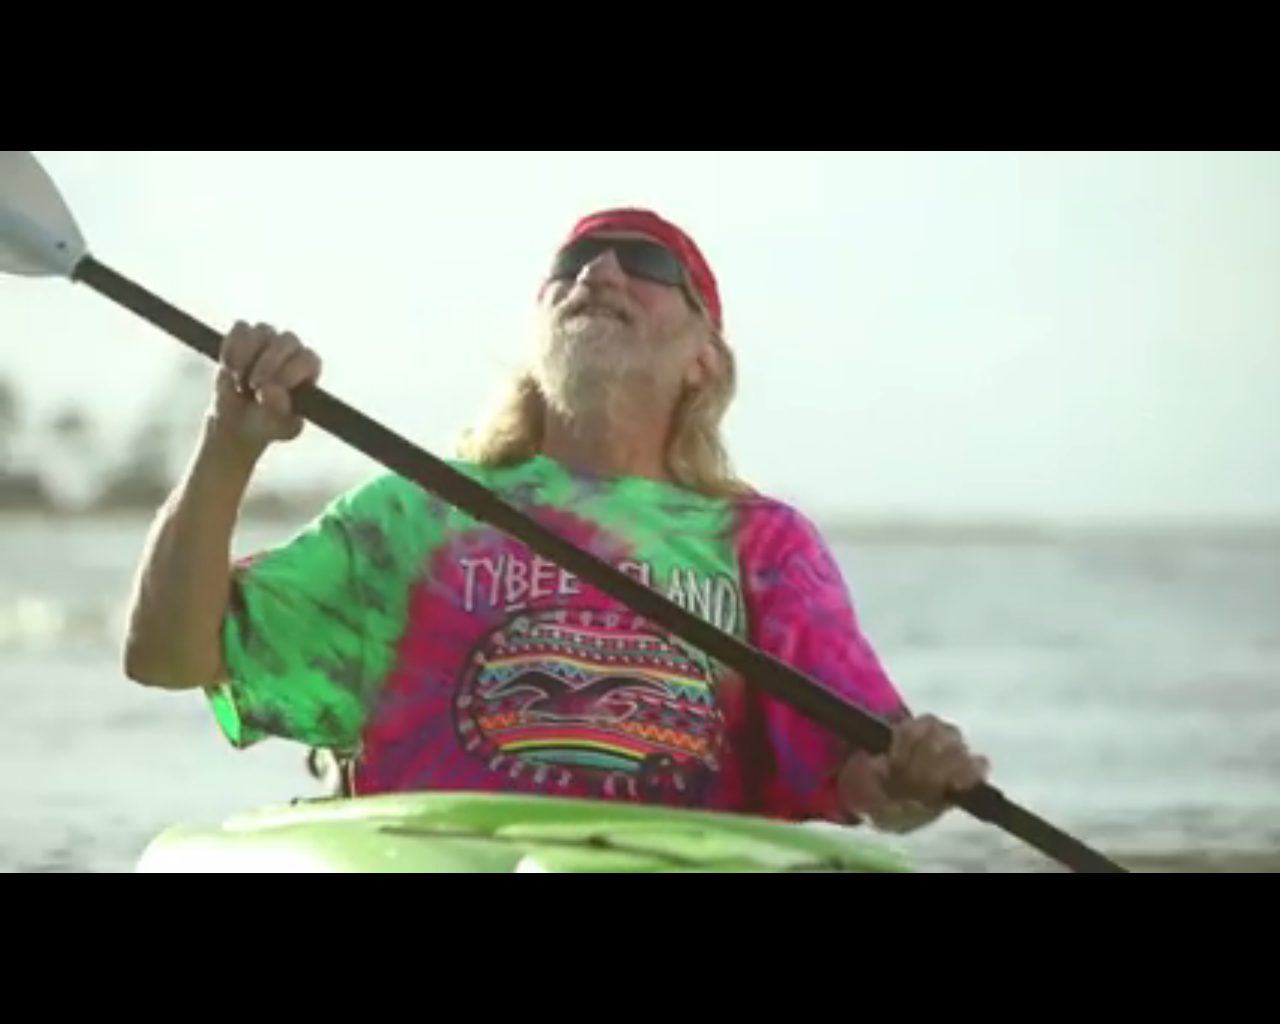 Is That Willie Nelson? - Tybee Island PSA